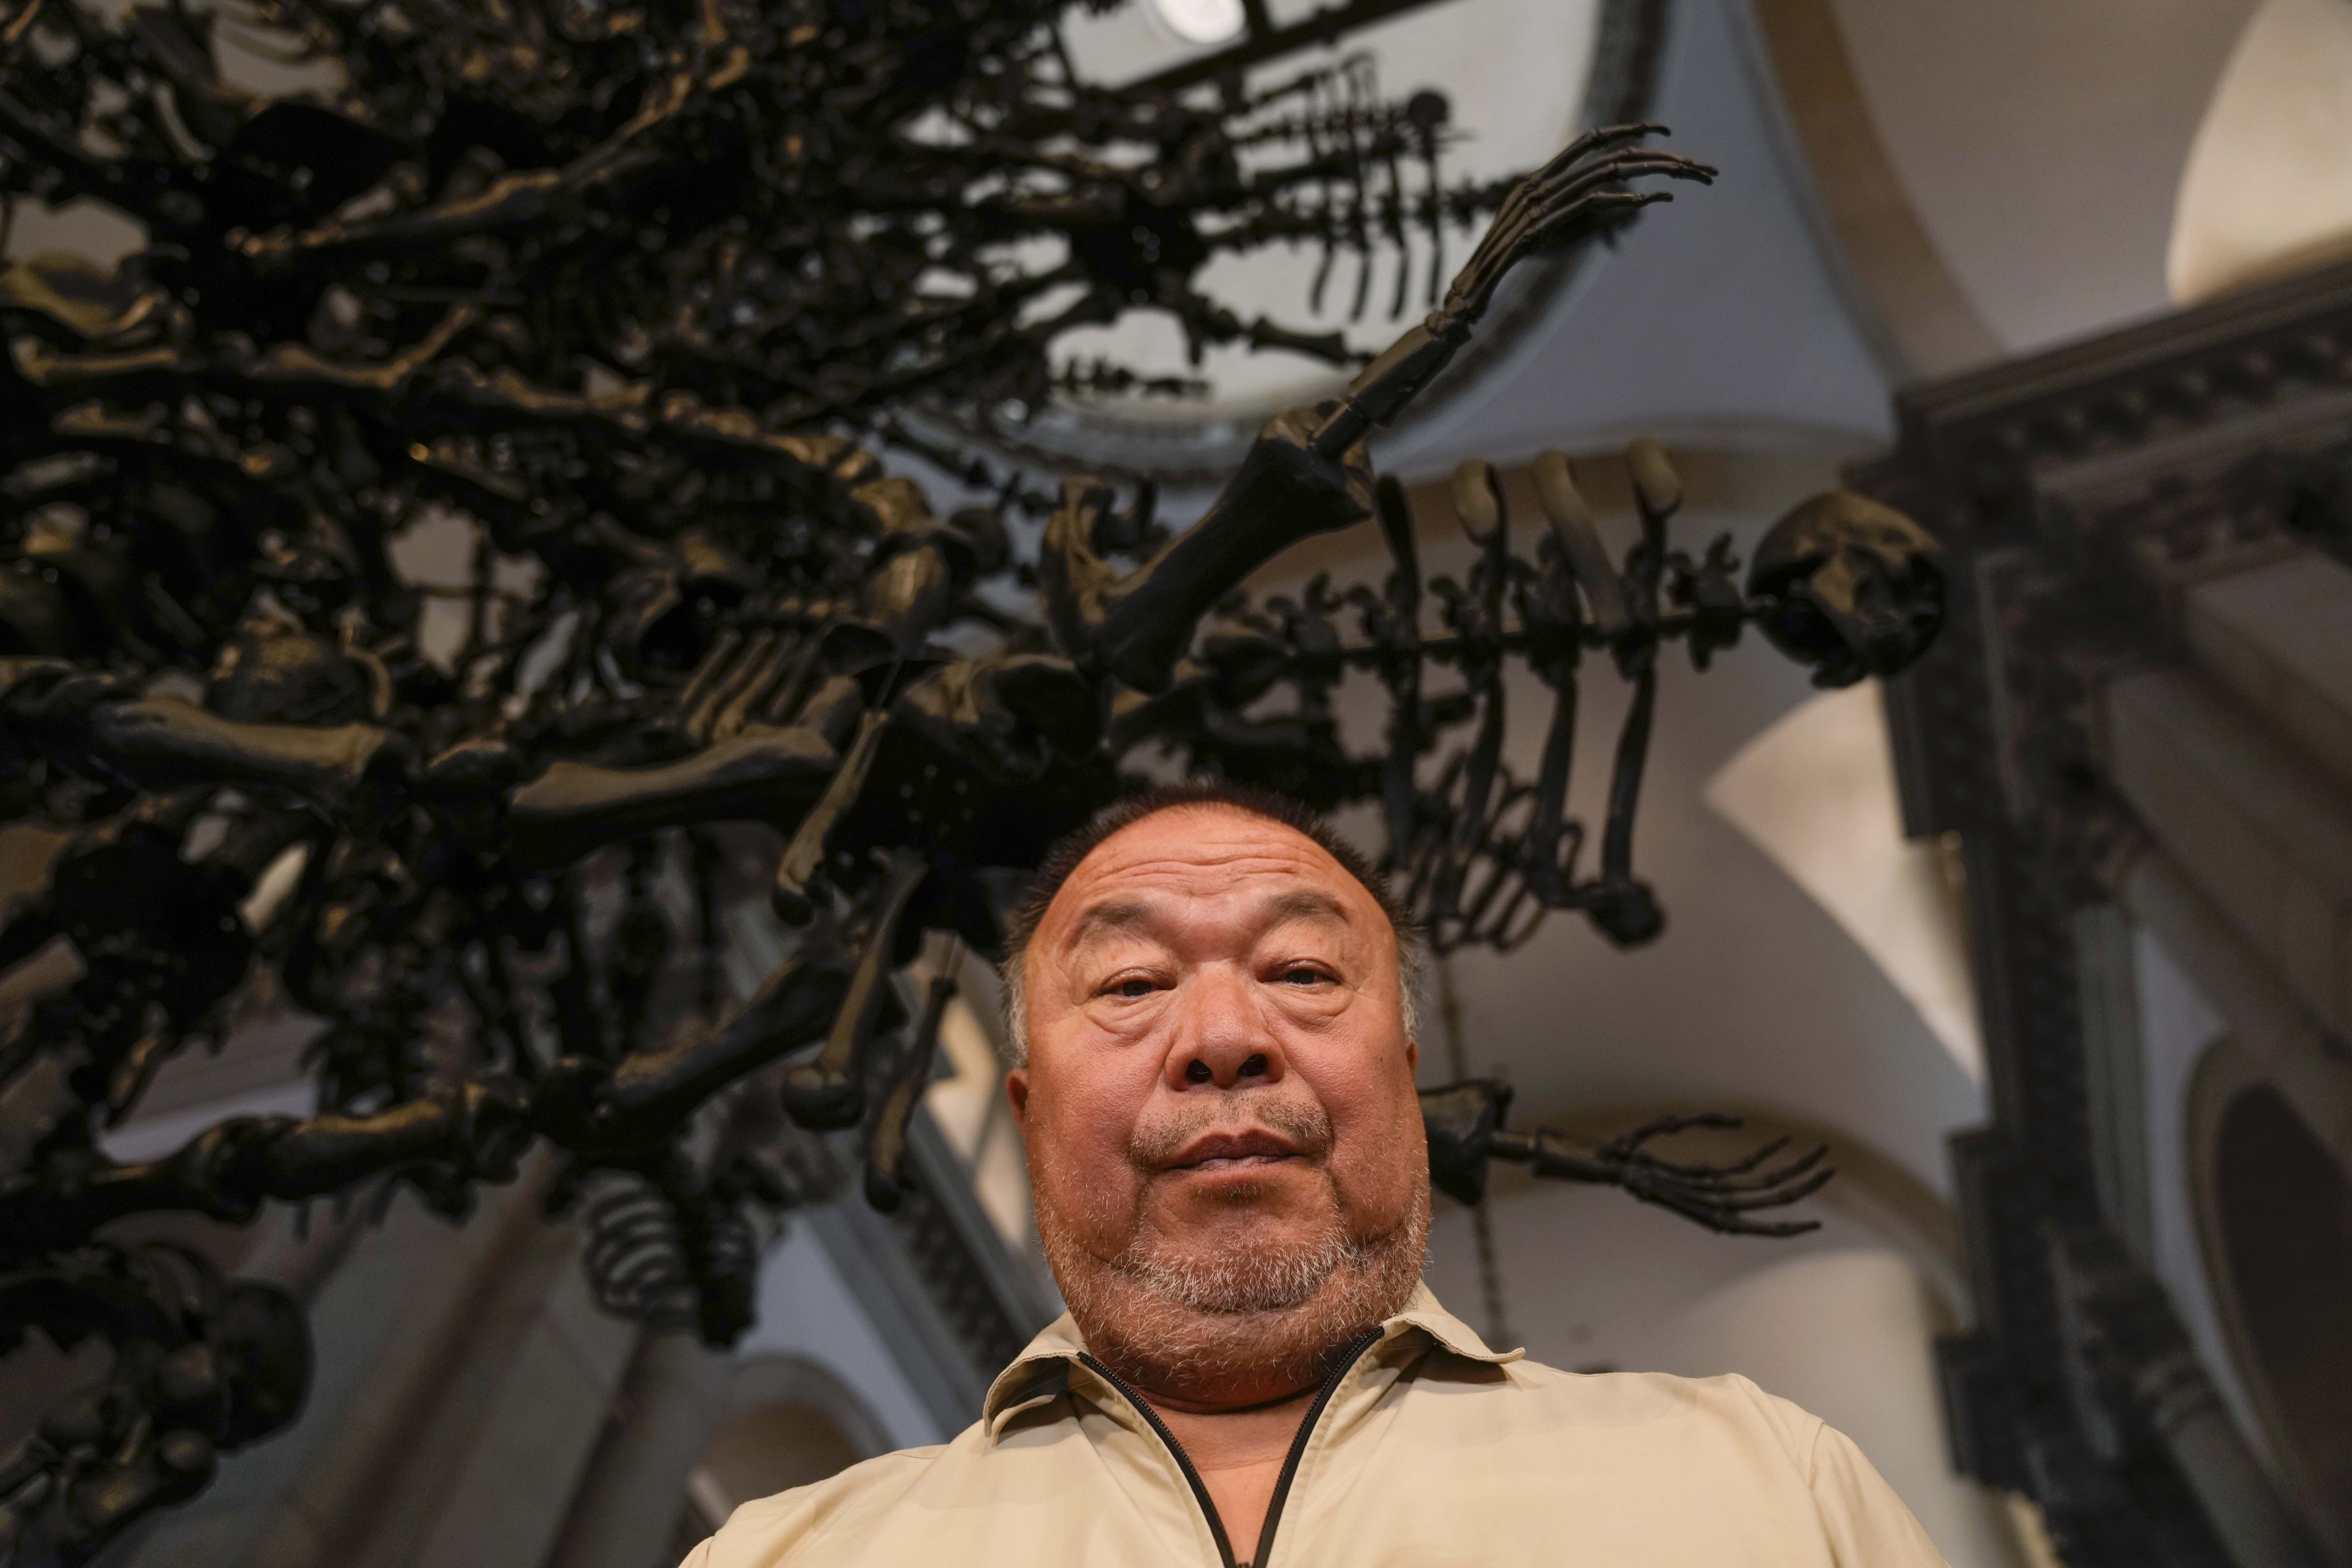 Chinese artist Ai Weiwei poses in front of his glass sculpture La Commedia Umana at the San Giorgio deconsecrated church in Venice, Italy on Friday. Photo: AP 